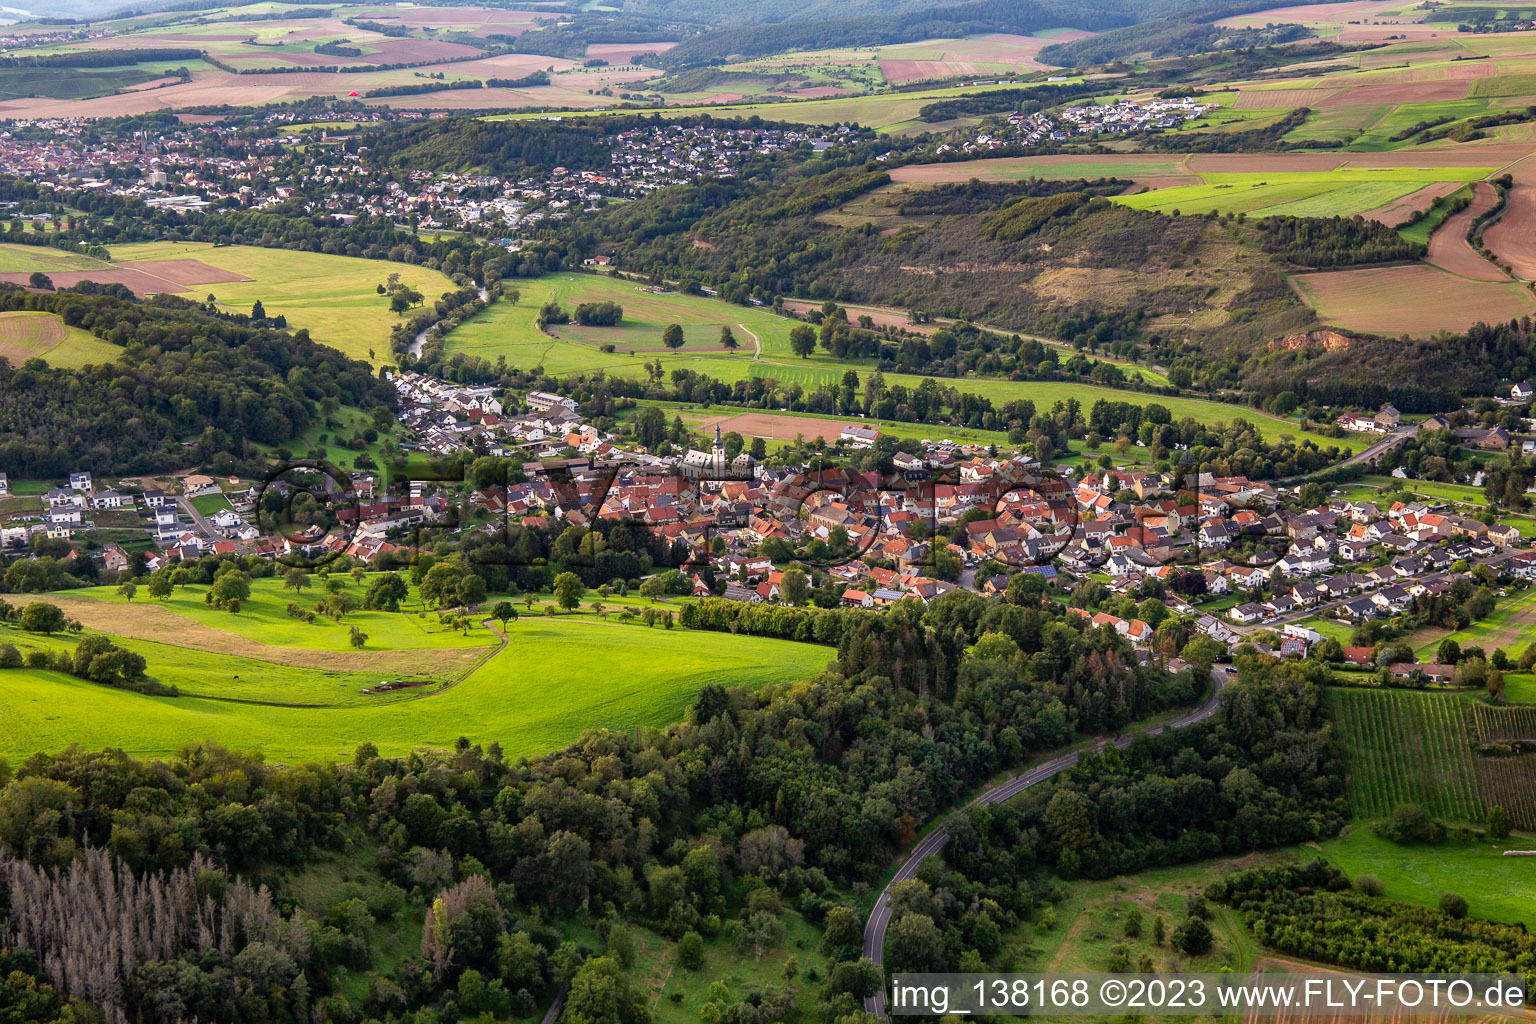 From the southeast in Staudernheim in the state Rhineland-Palatinate, Germany